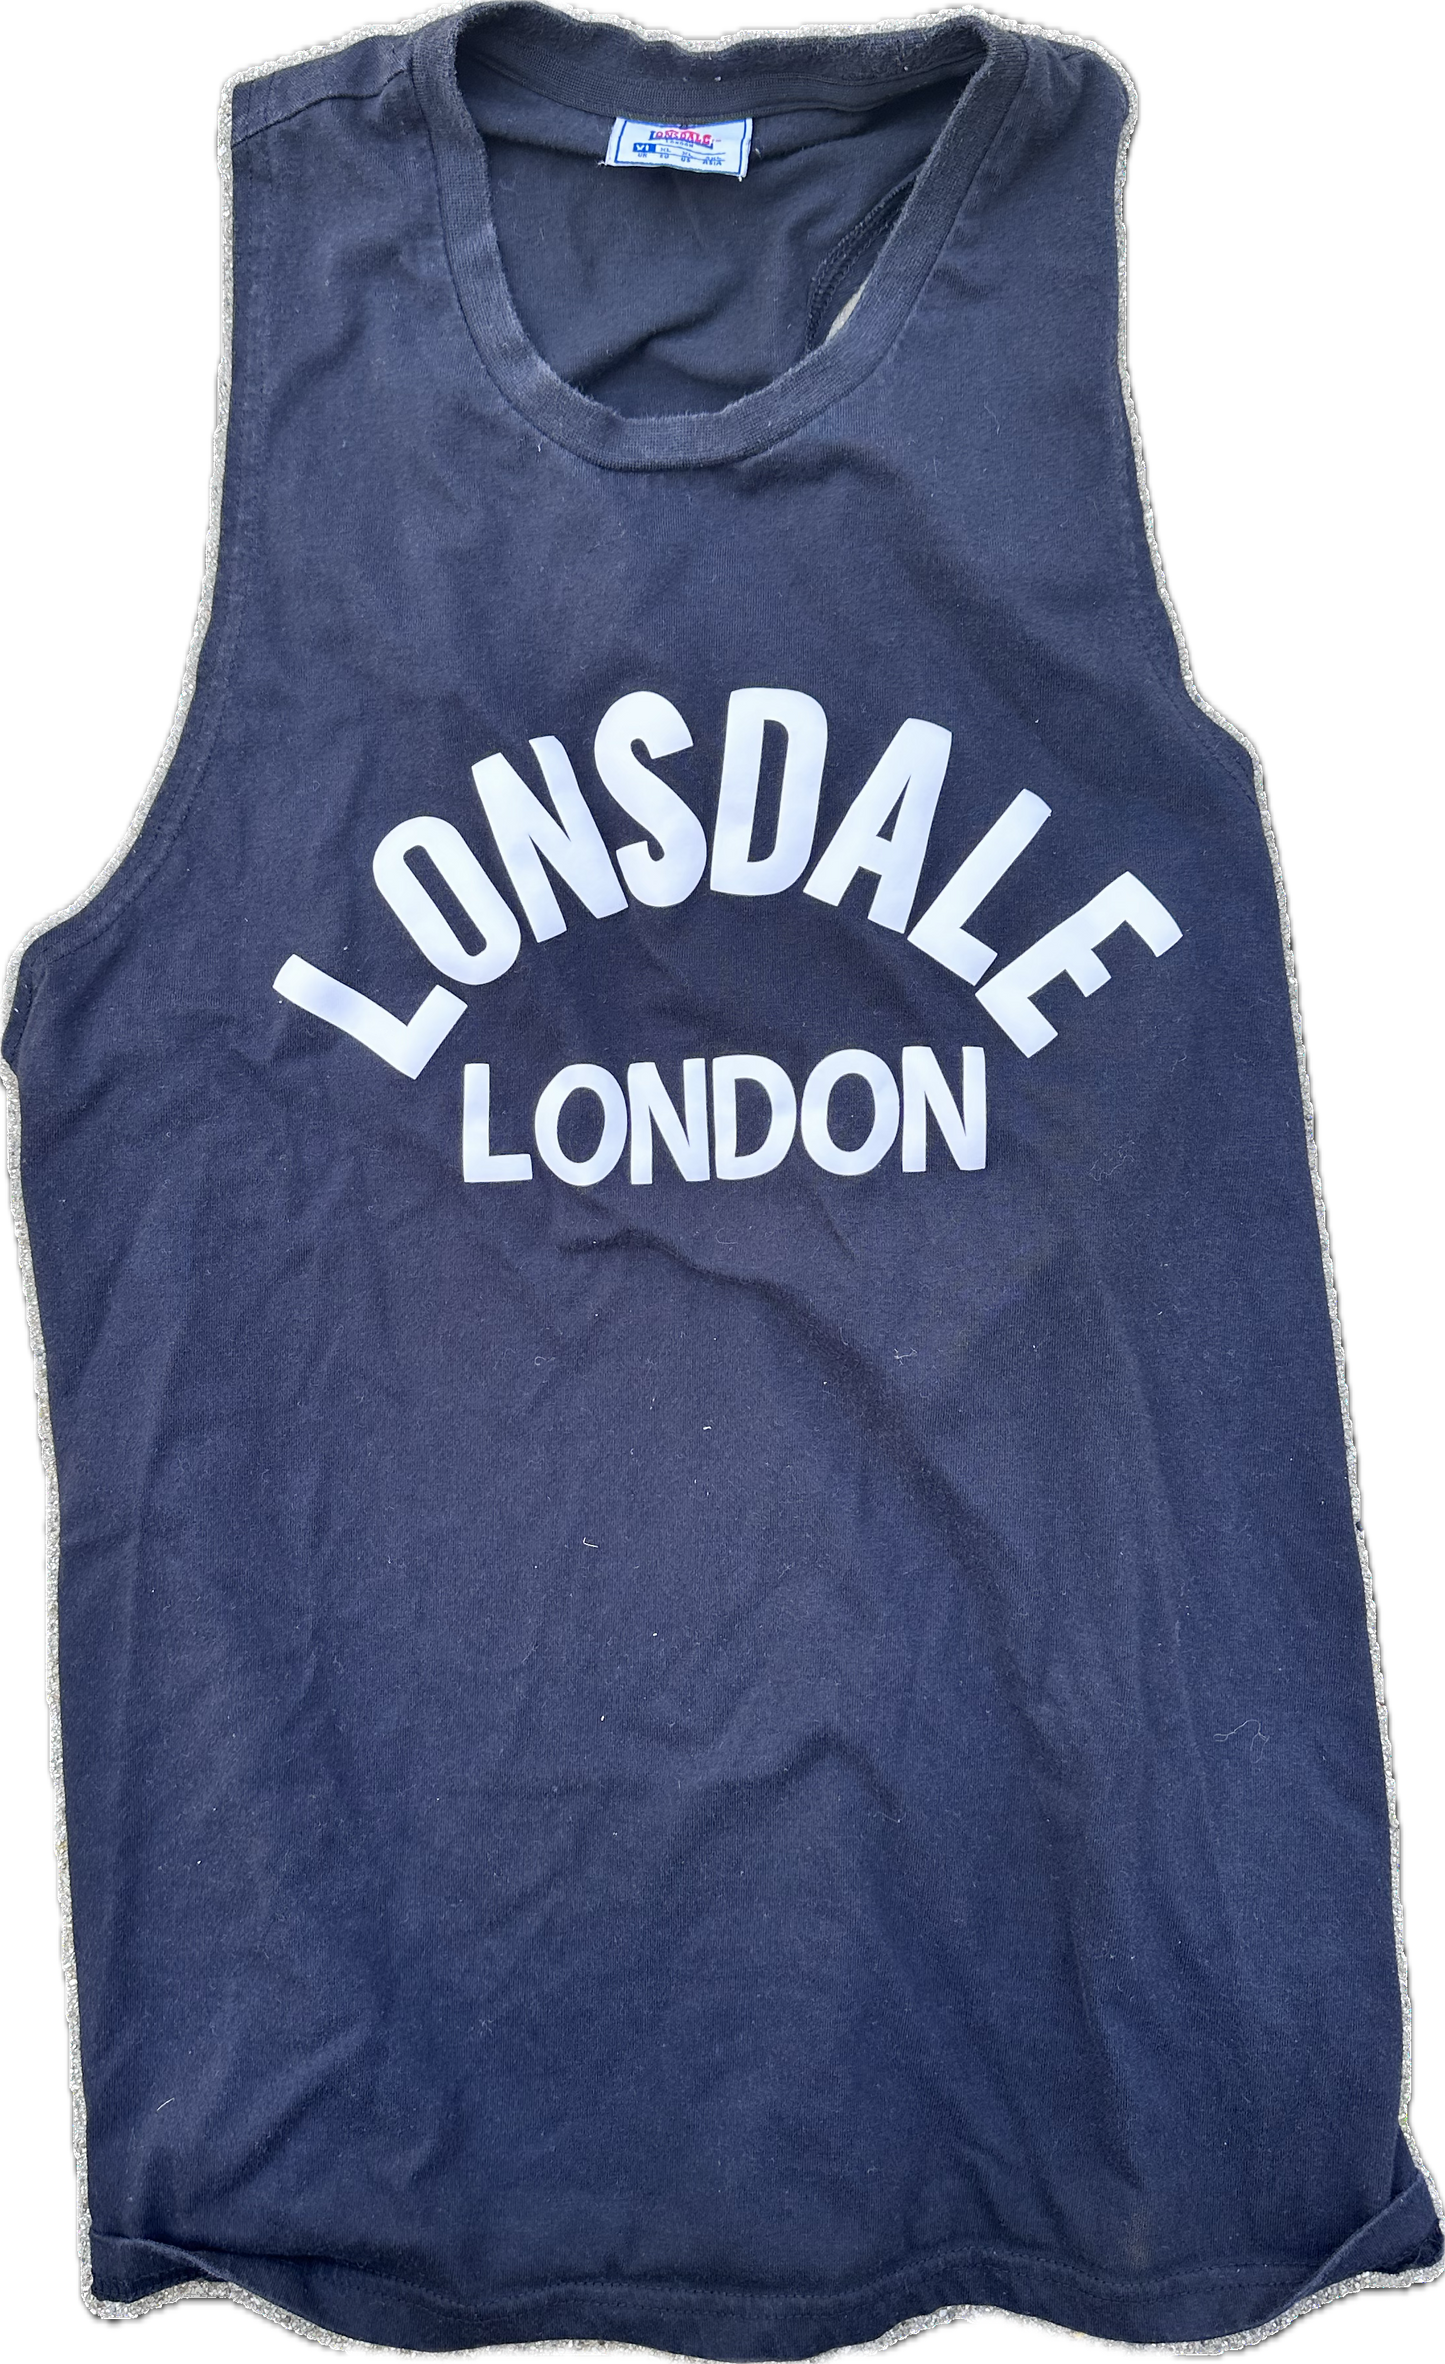 THE GENTLEMEN: Benny's Black LONSDALE Tank Top and Blue Shorts "MMA" Outfit (XL)